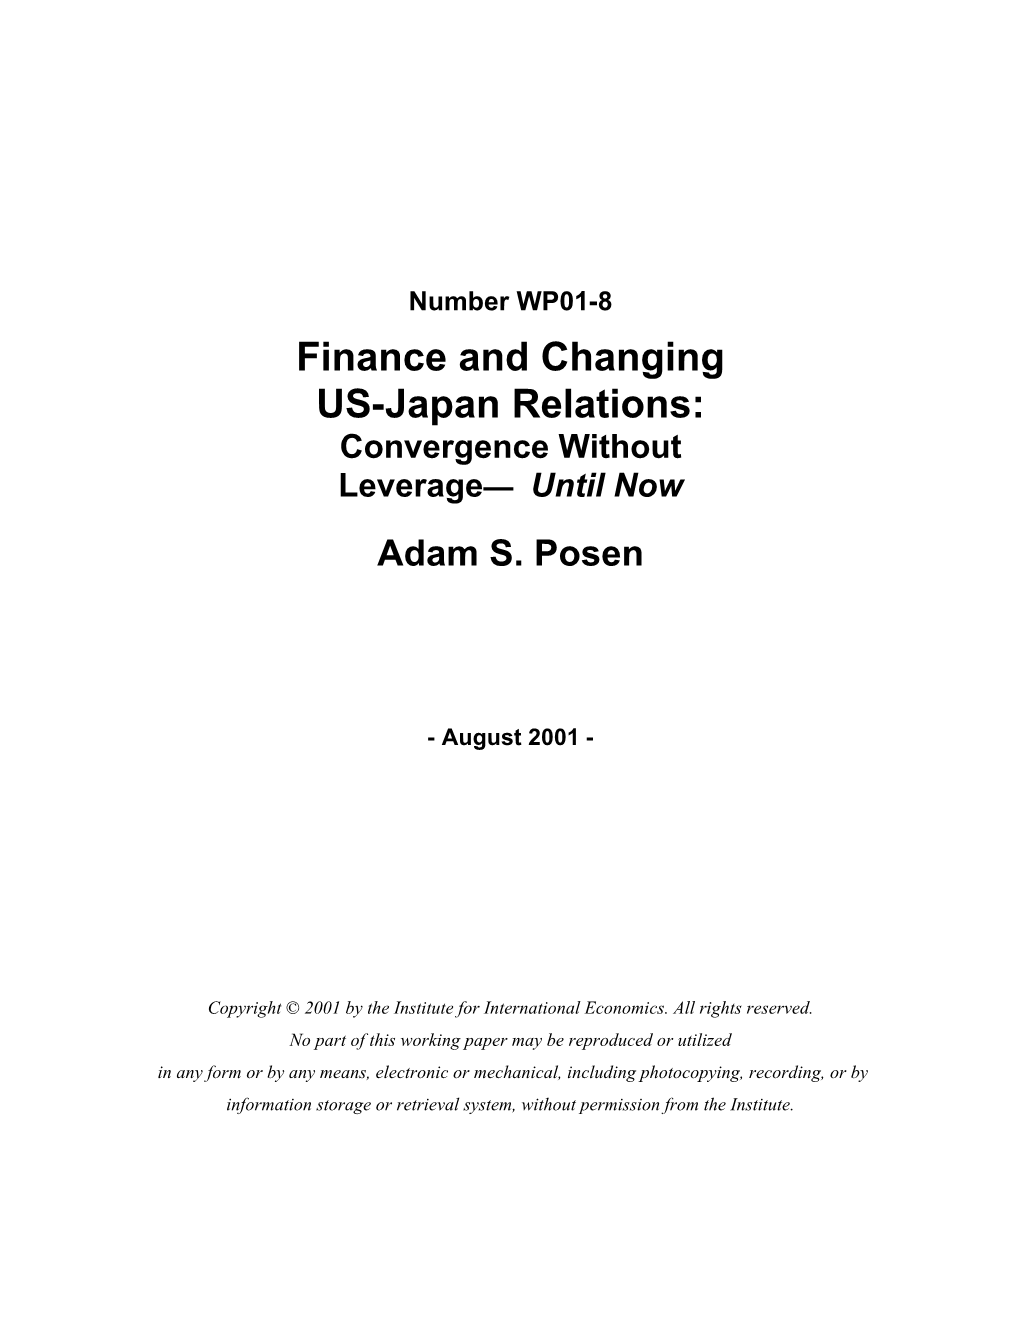 Finance and Changing US-Japan Relations: Convergence Without Leverage— Until Now